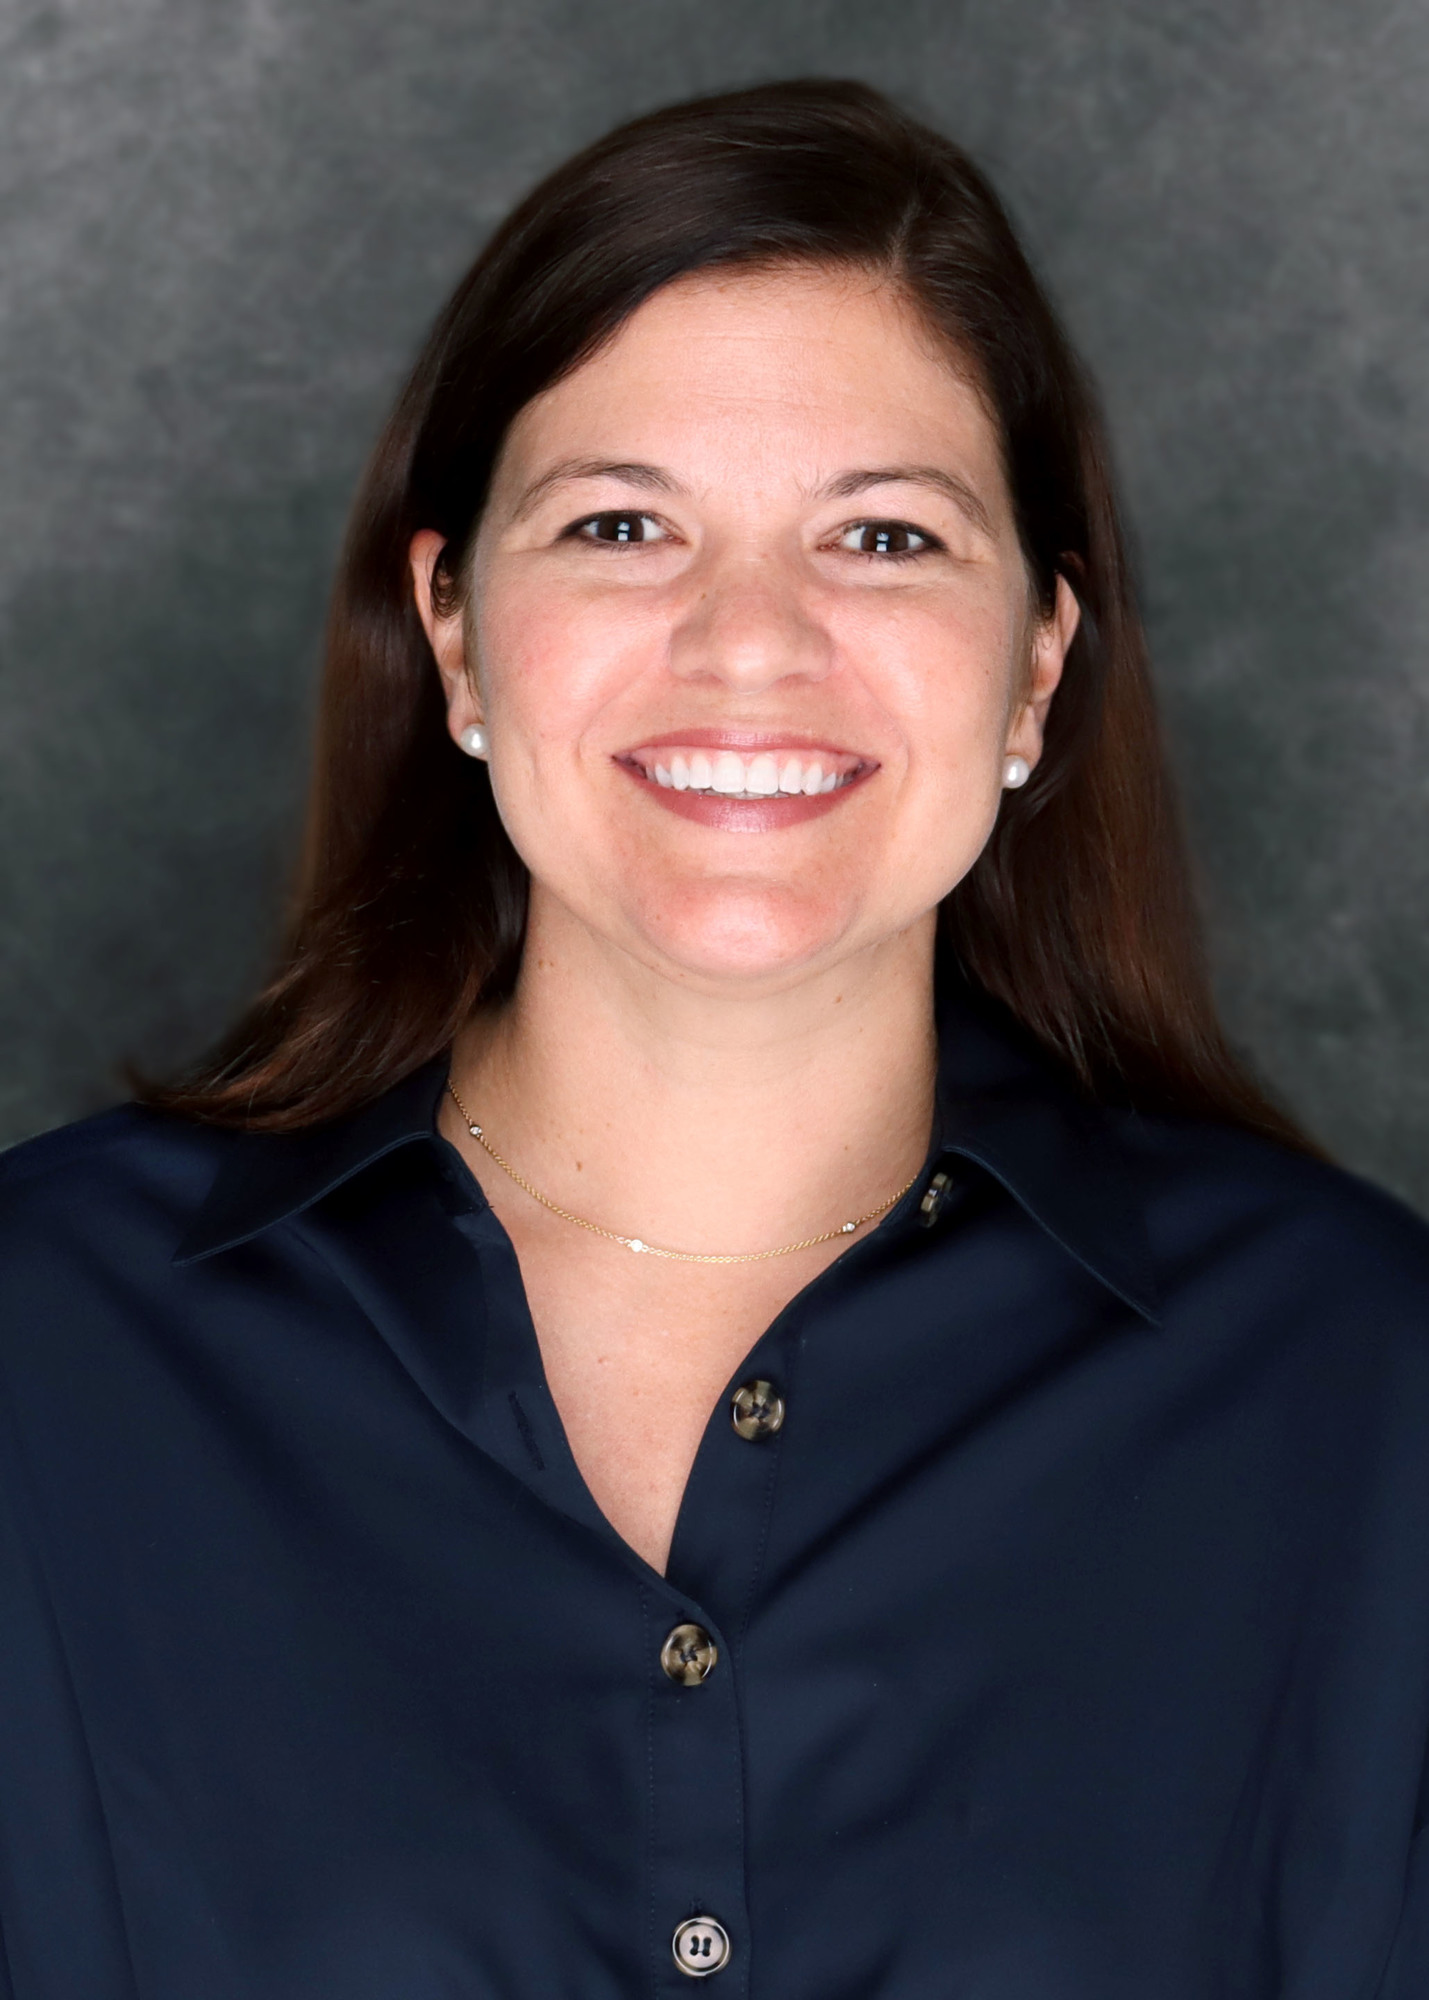 Jamie Hannon has become the new principal at Southside Elementary School. (Courtesy photo)